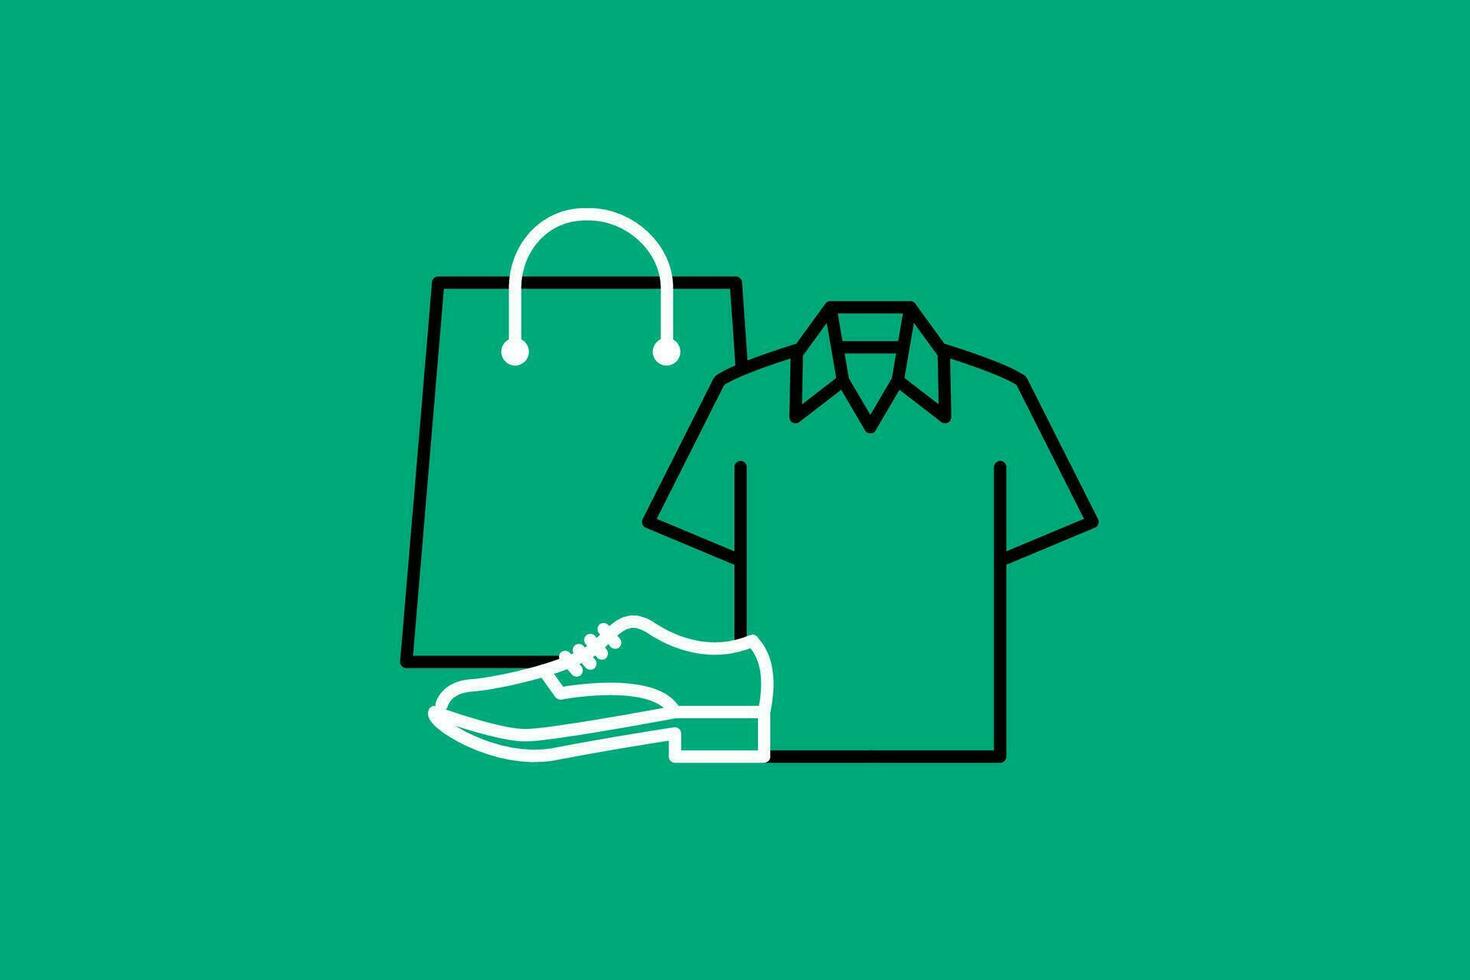 Shopping bag and t-shirt icon on a green background. vector